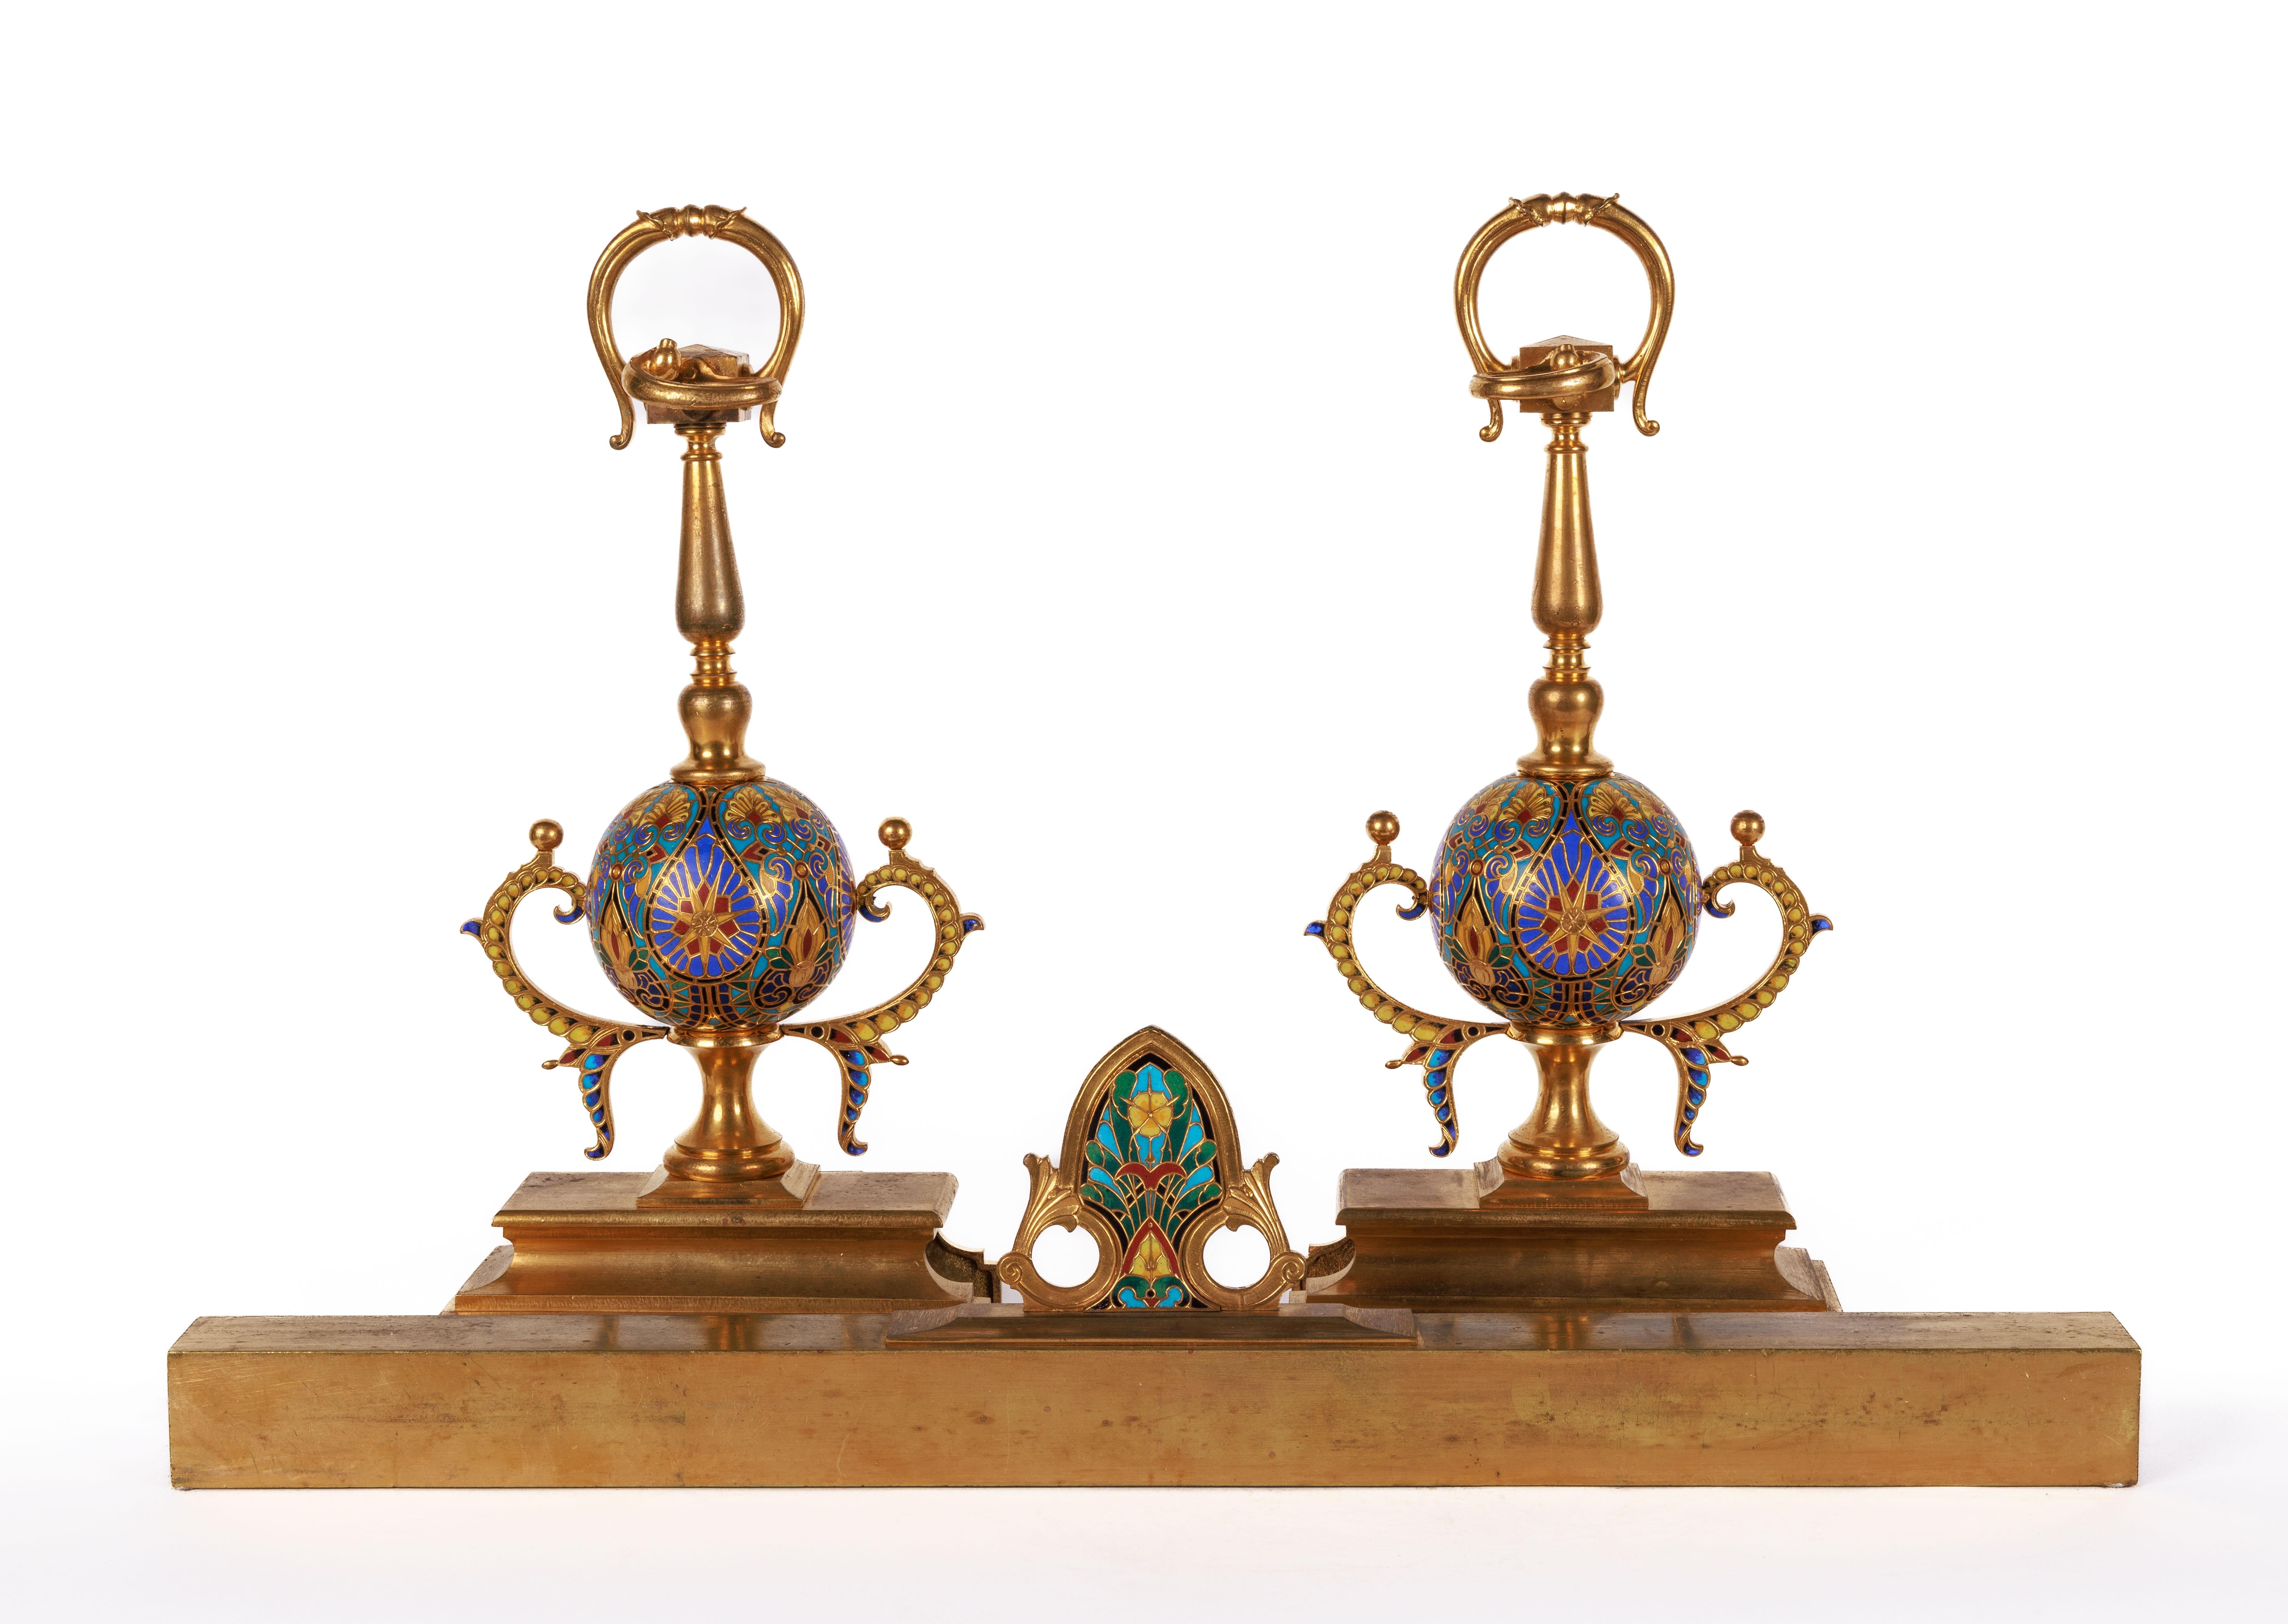 Ferdinand Barbedienne, A Pair of French Ormolu and Champleve Enamel Andirons 1